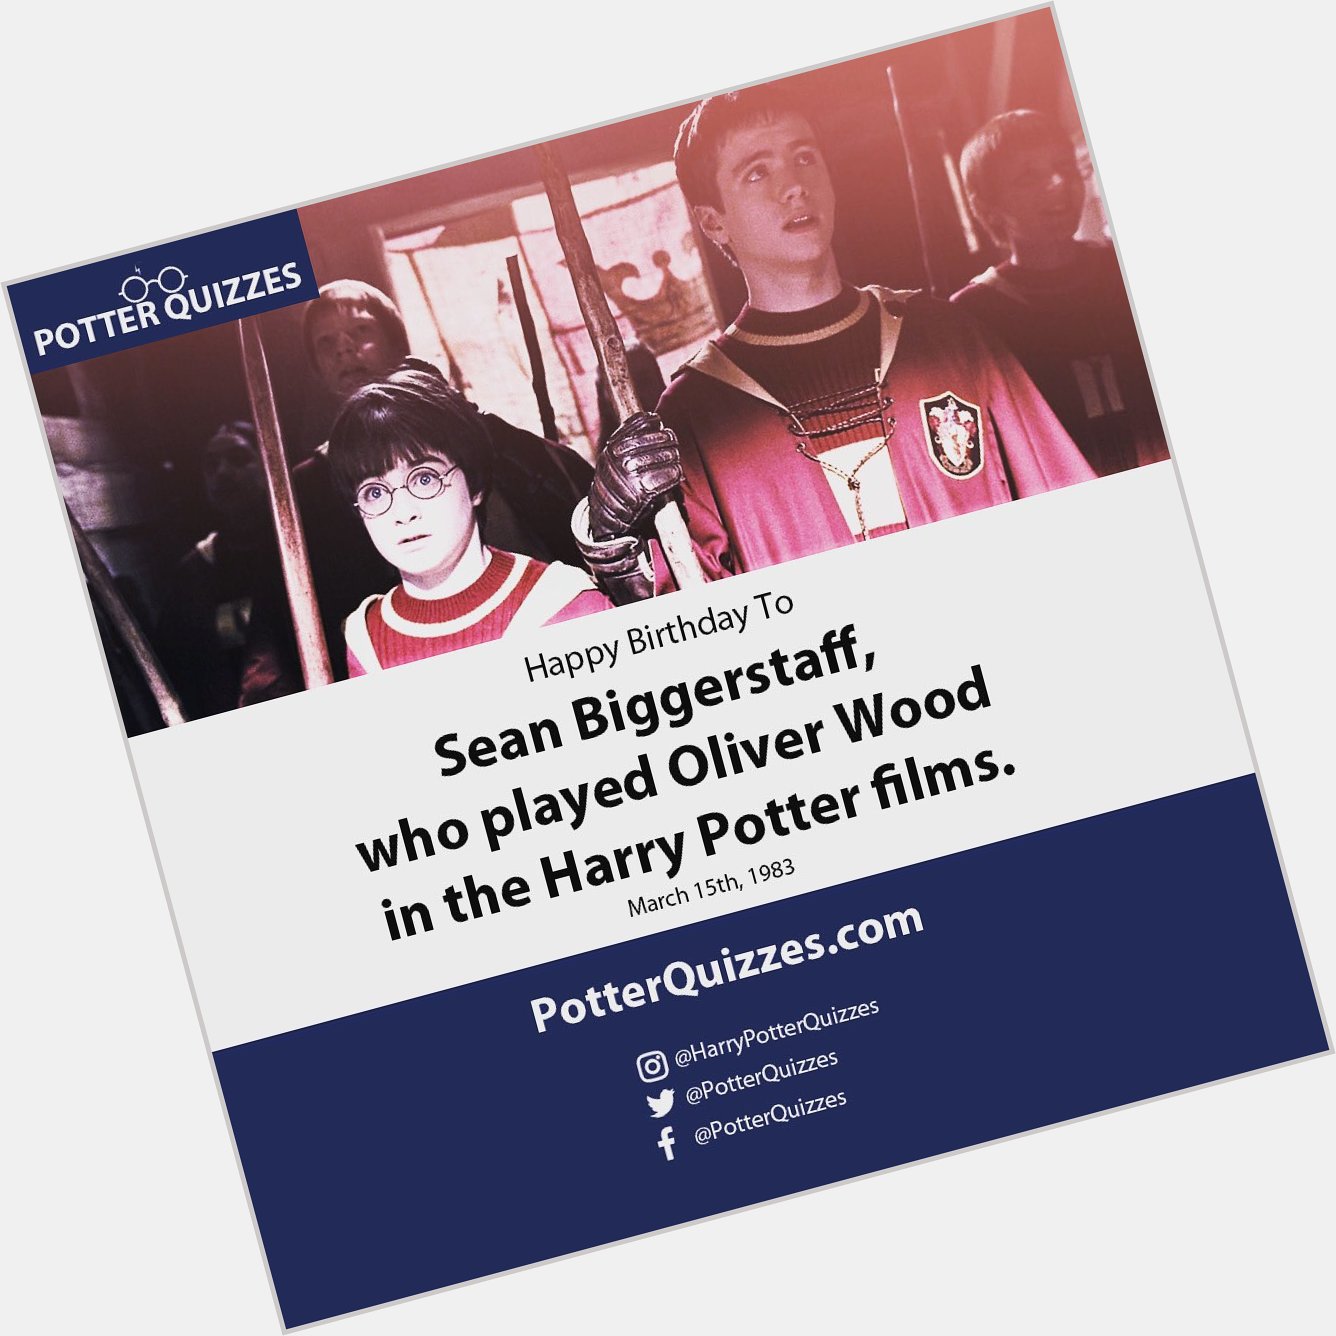 Happy birthday to Sean Biggerstaff, who played Oliver Wood in the films. 